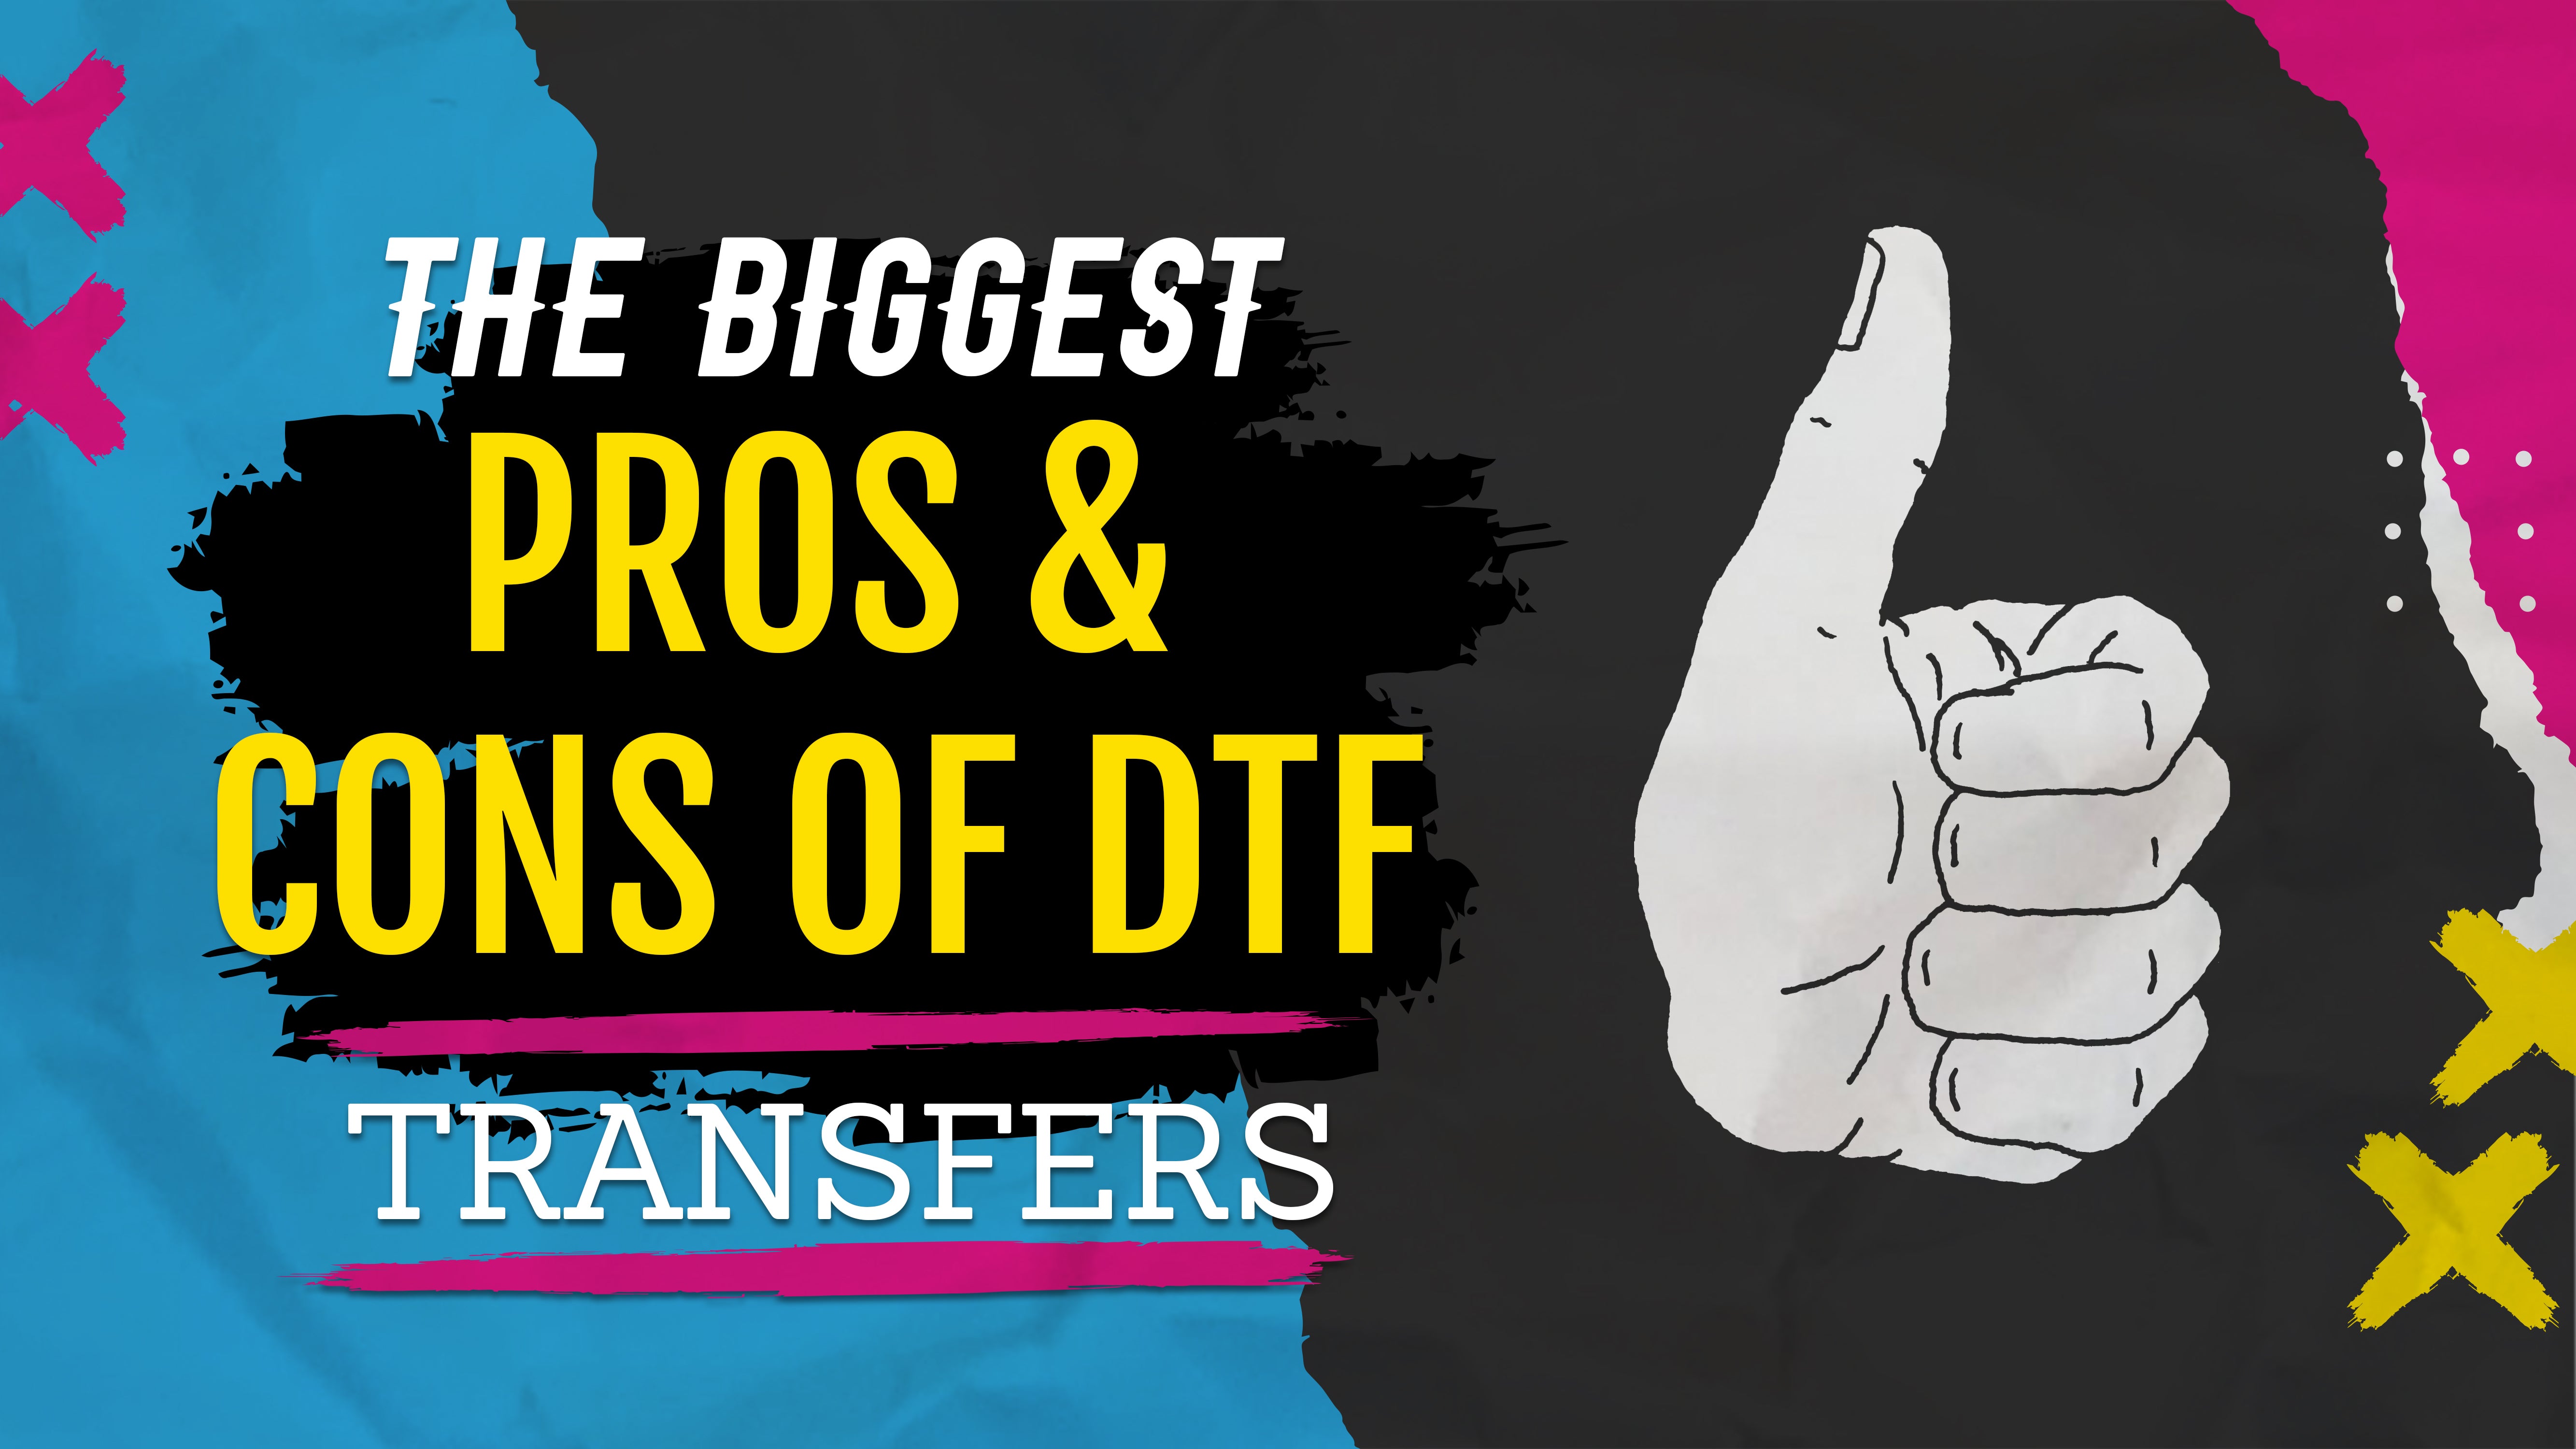 Your only Limit is you ready to press Digital DTF Stock iron on Transfer